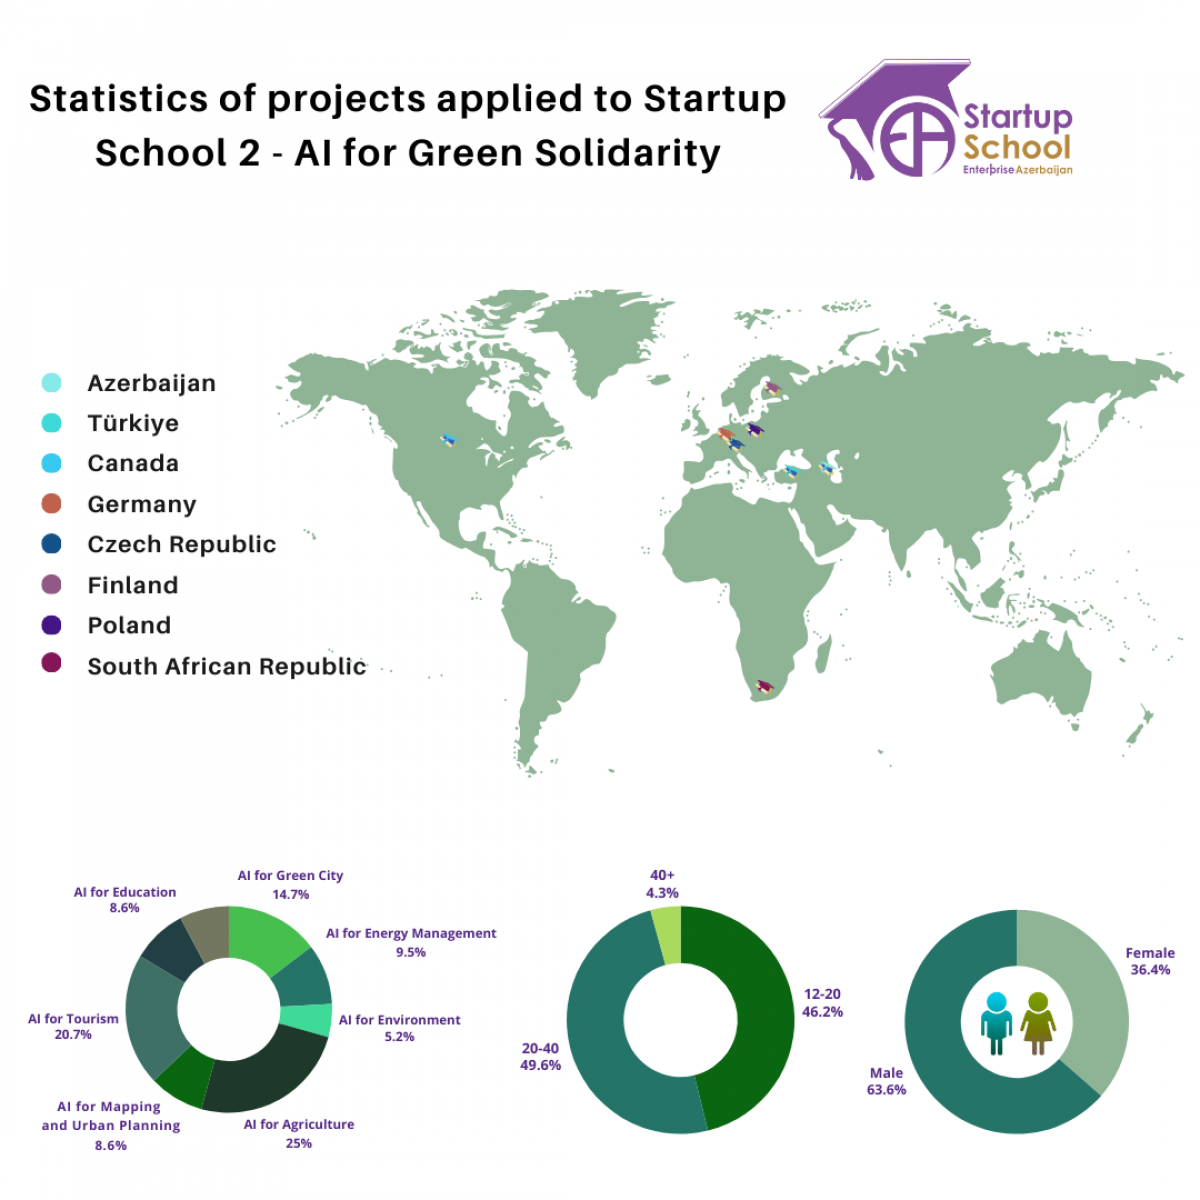 121 projects from 9 countries of the world were submitted to the "Startup School 2" project